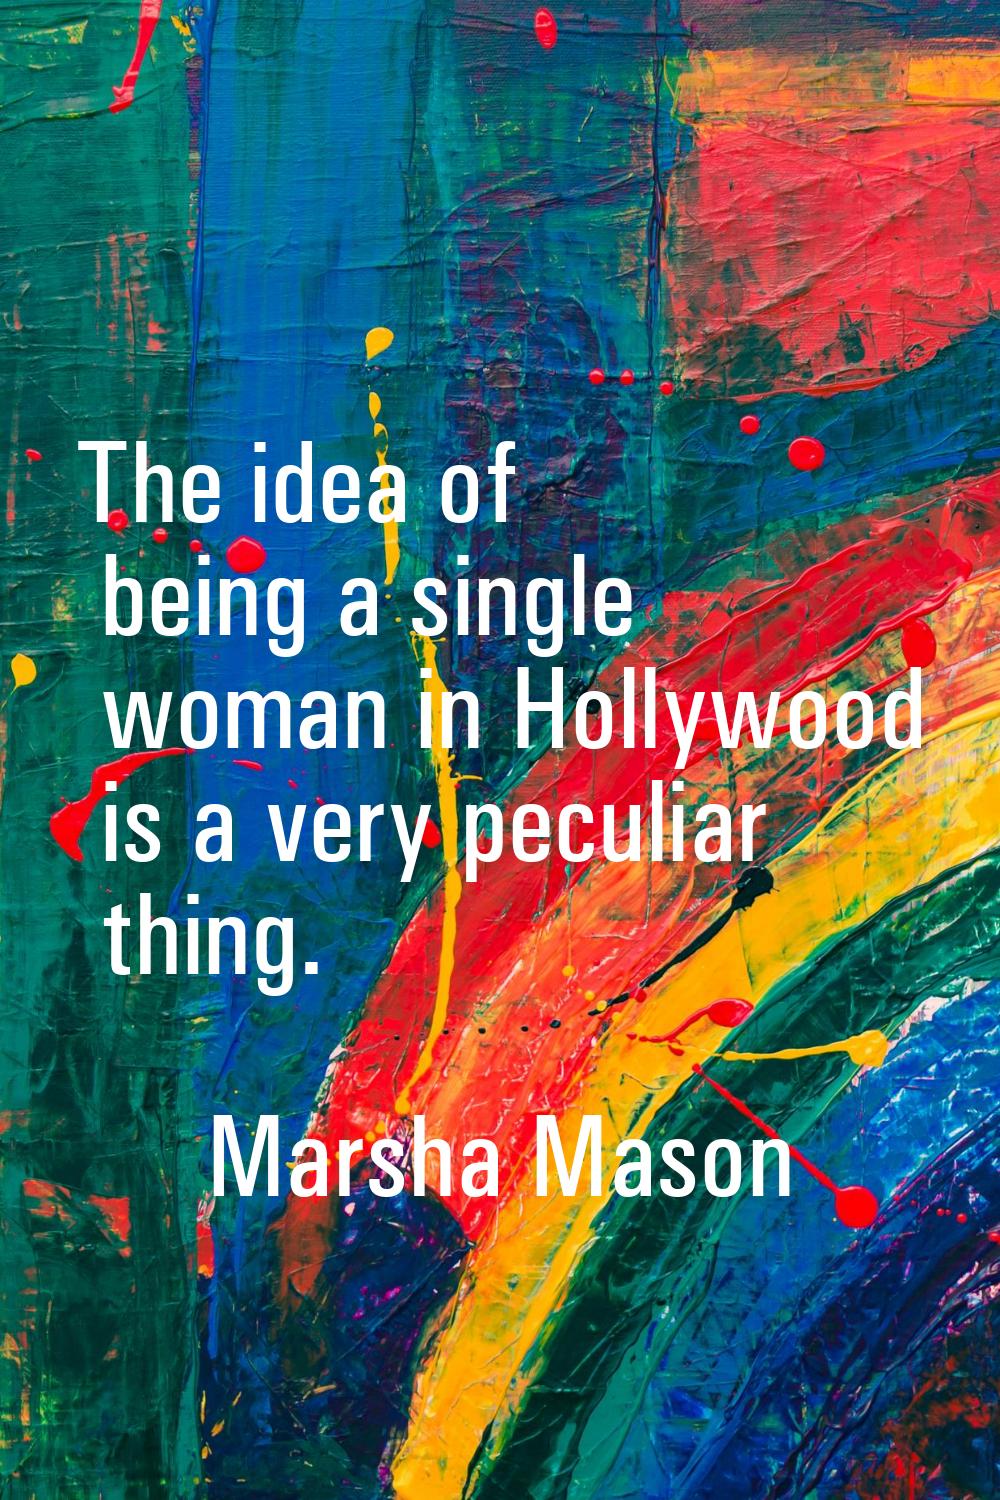 The idea of being a single woman in Hollywood is a very peculiar thing.